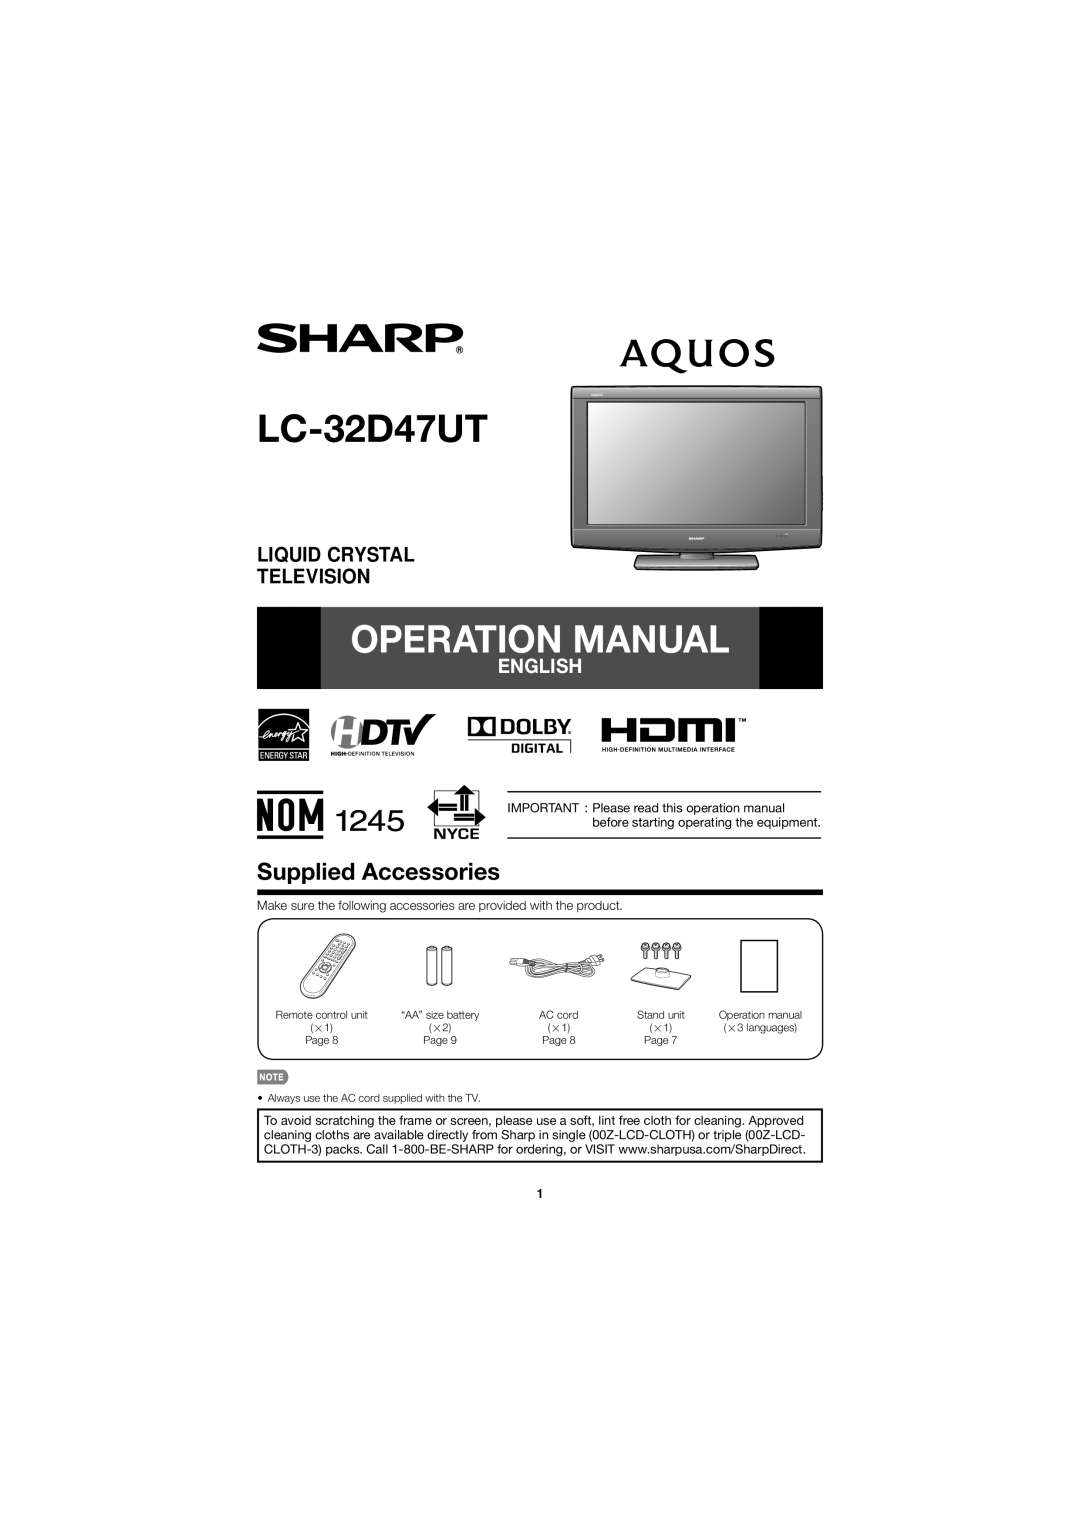 Sharp LC32D47UT operation manual LC-32D47UT, Supplied Accessories, Operation Manual, Liquid Crystal Television, English 